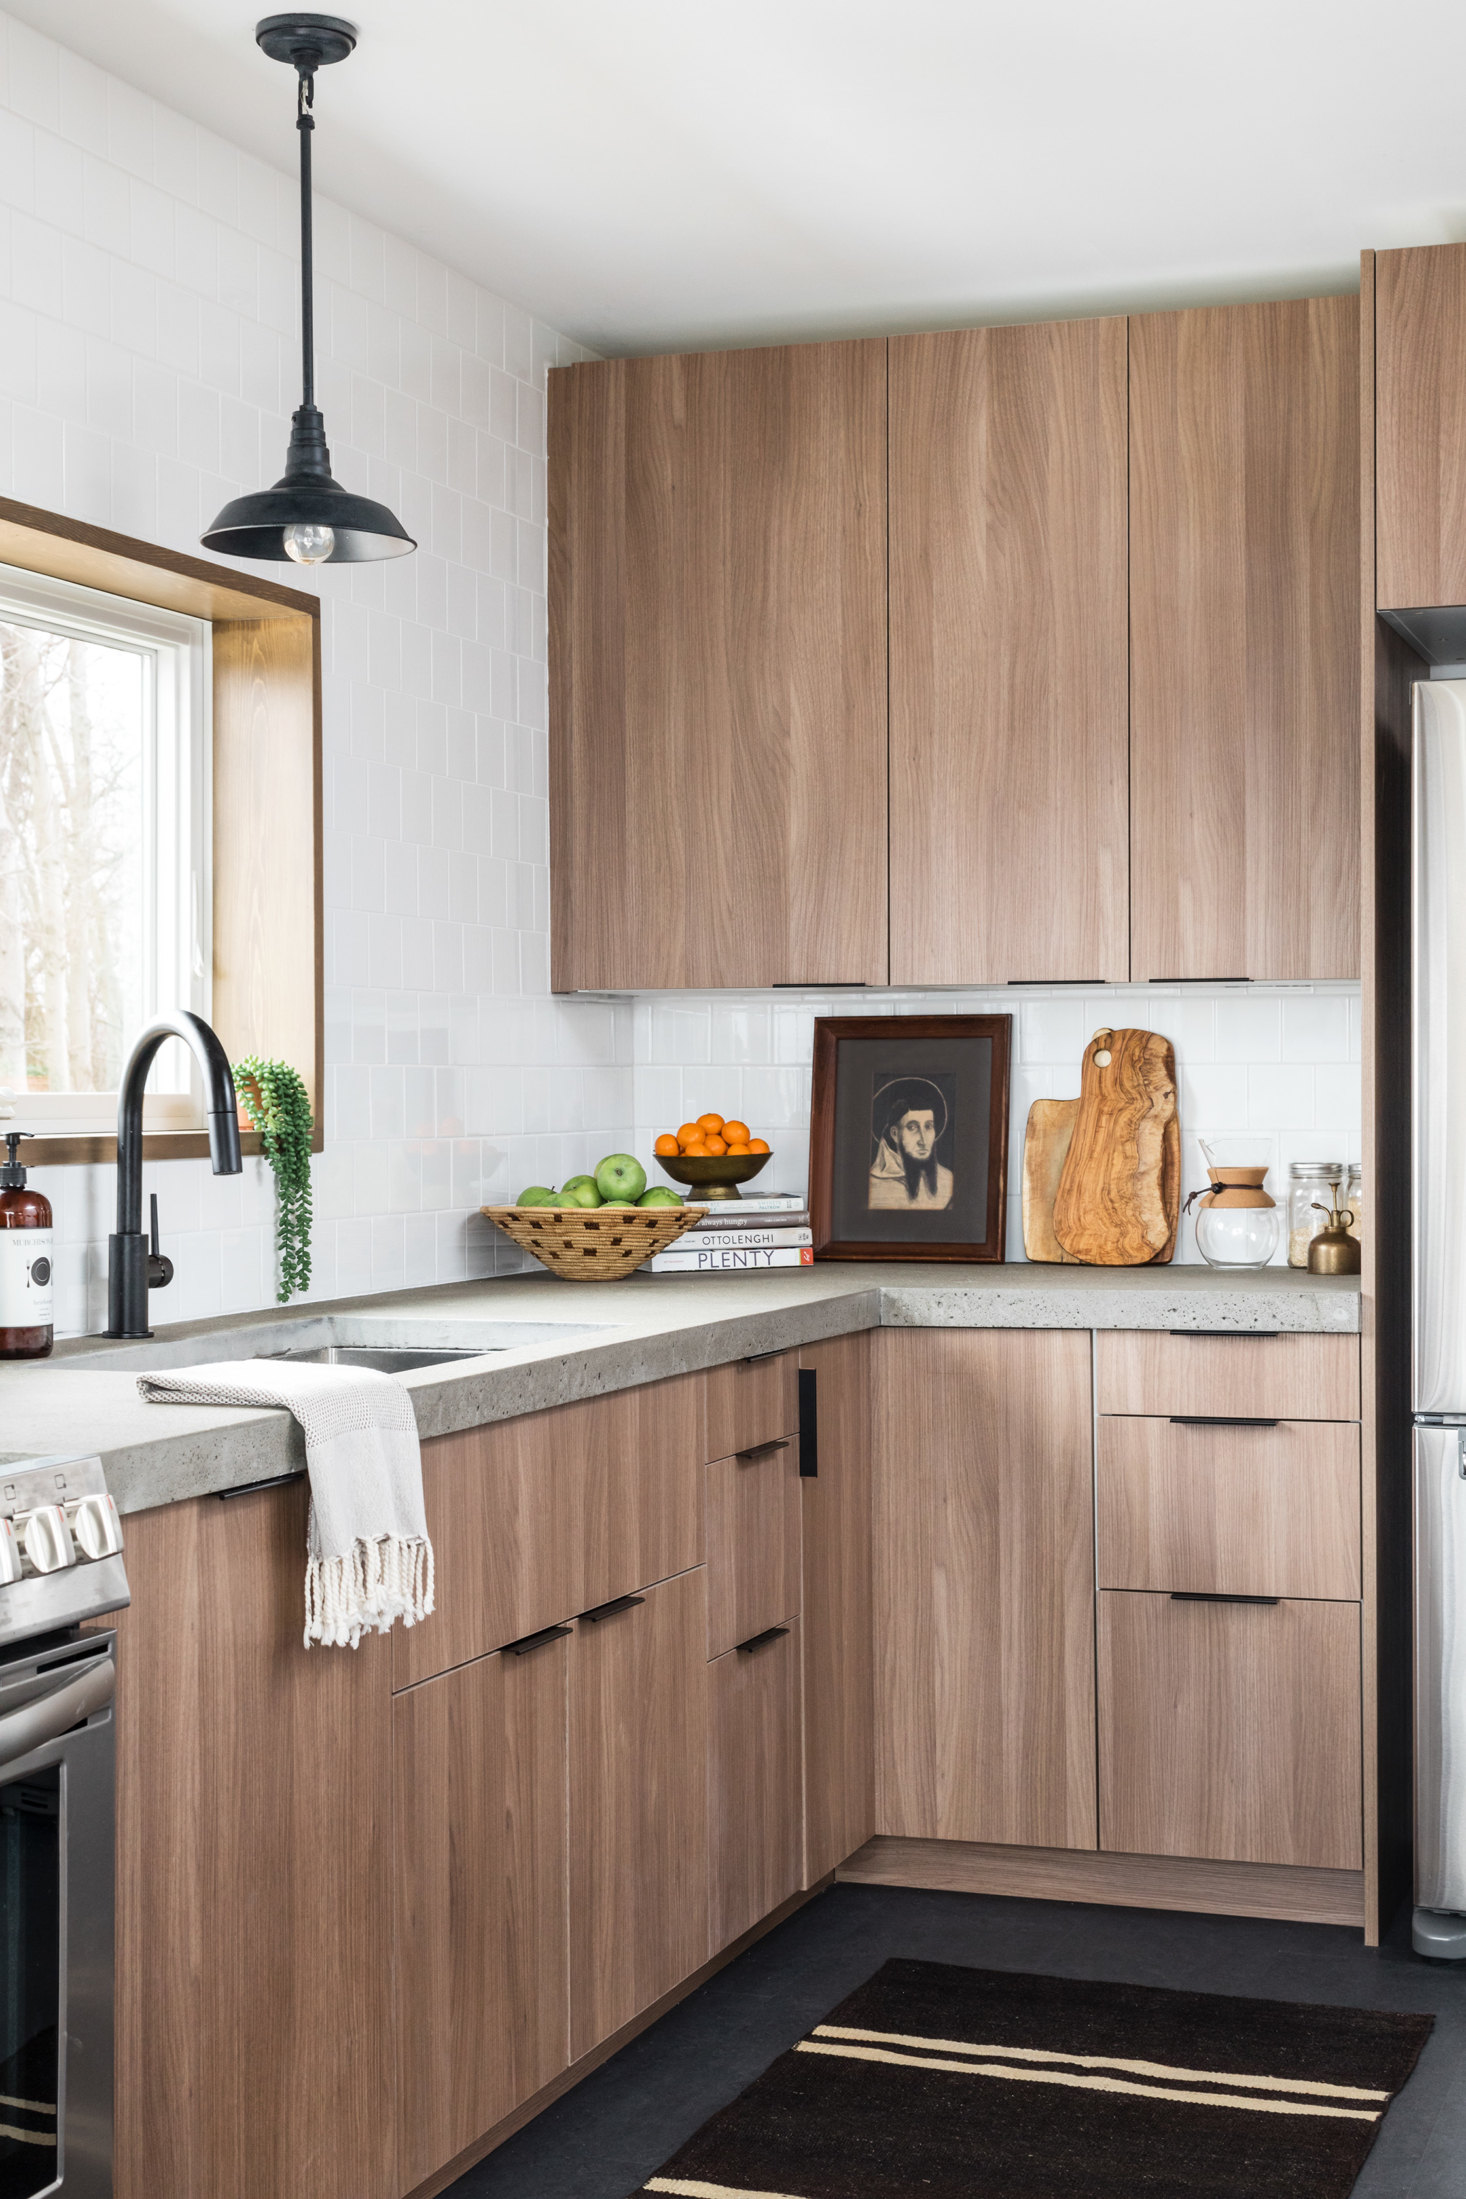 Ikea Kitchen Cabinetry Everything You Need To Know And More The